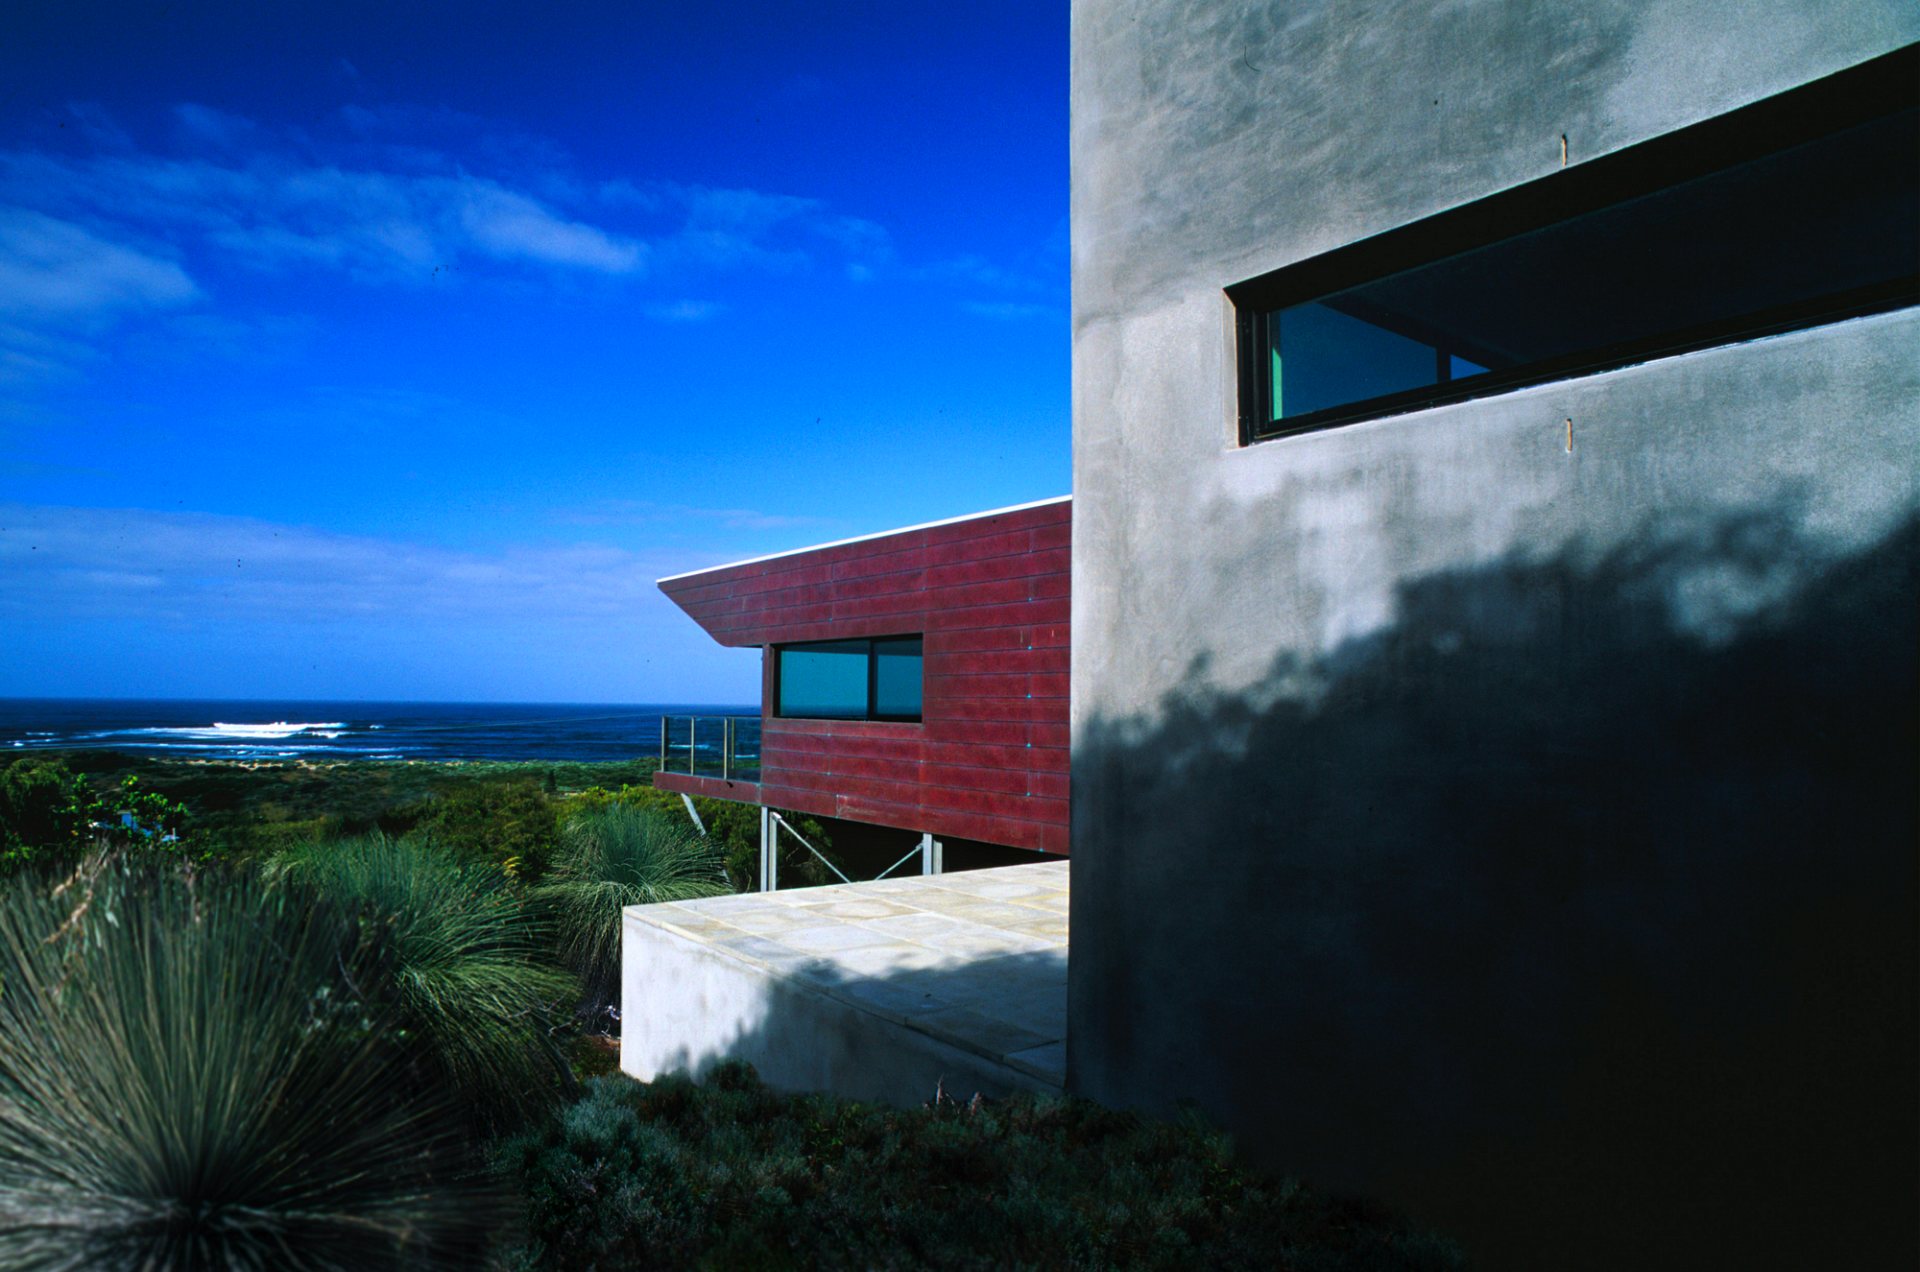 Southern elevation of architectural award winning beach house built with copper and concrete overlooking the Indian Ocean.